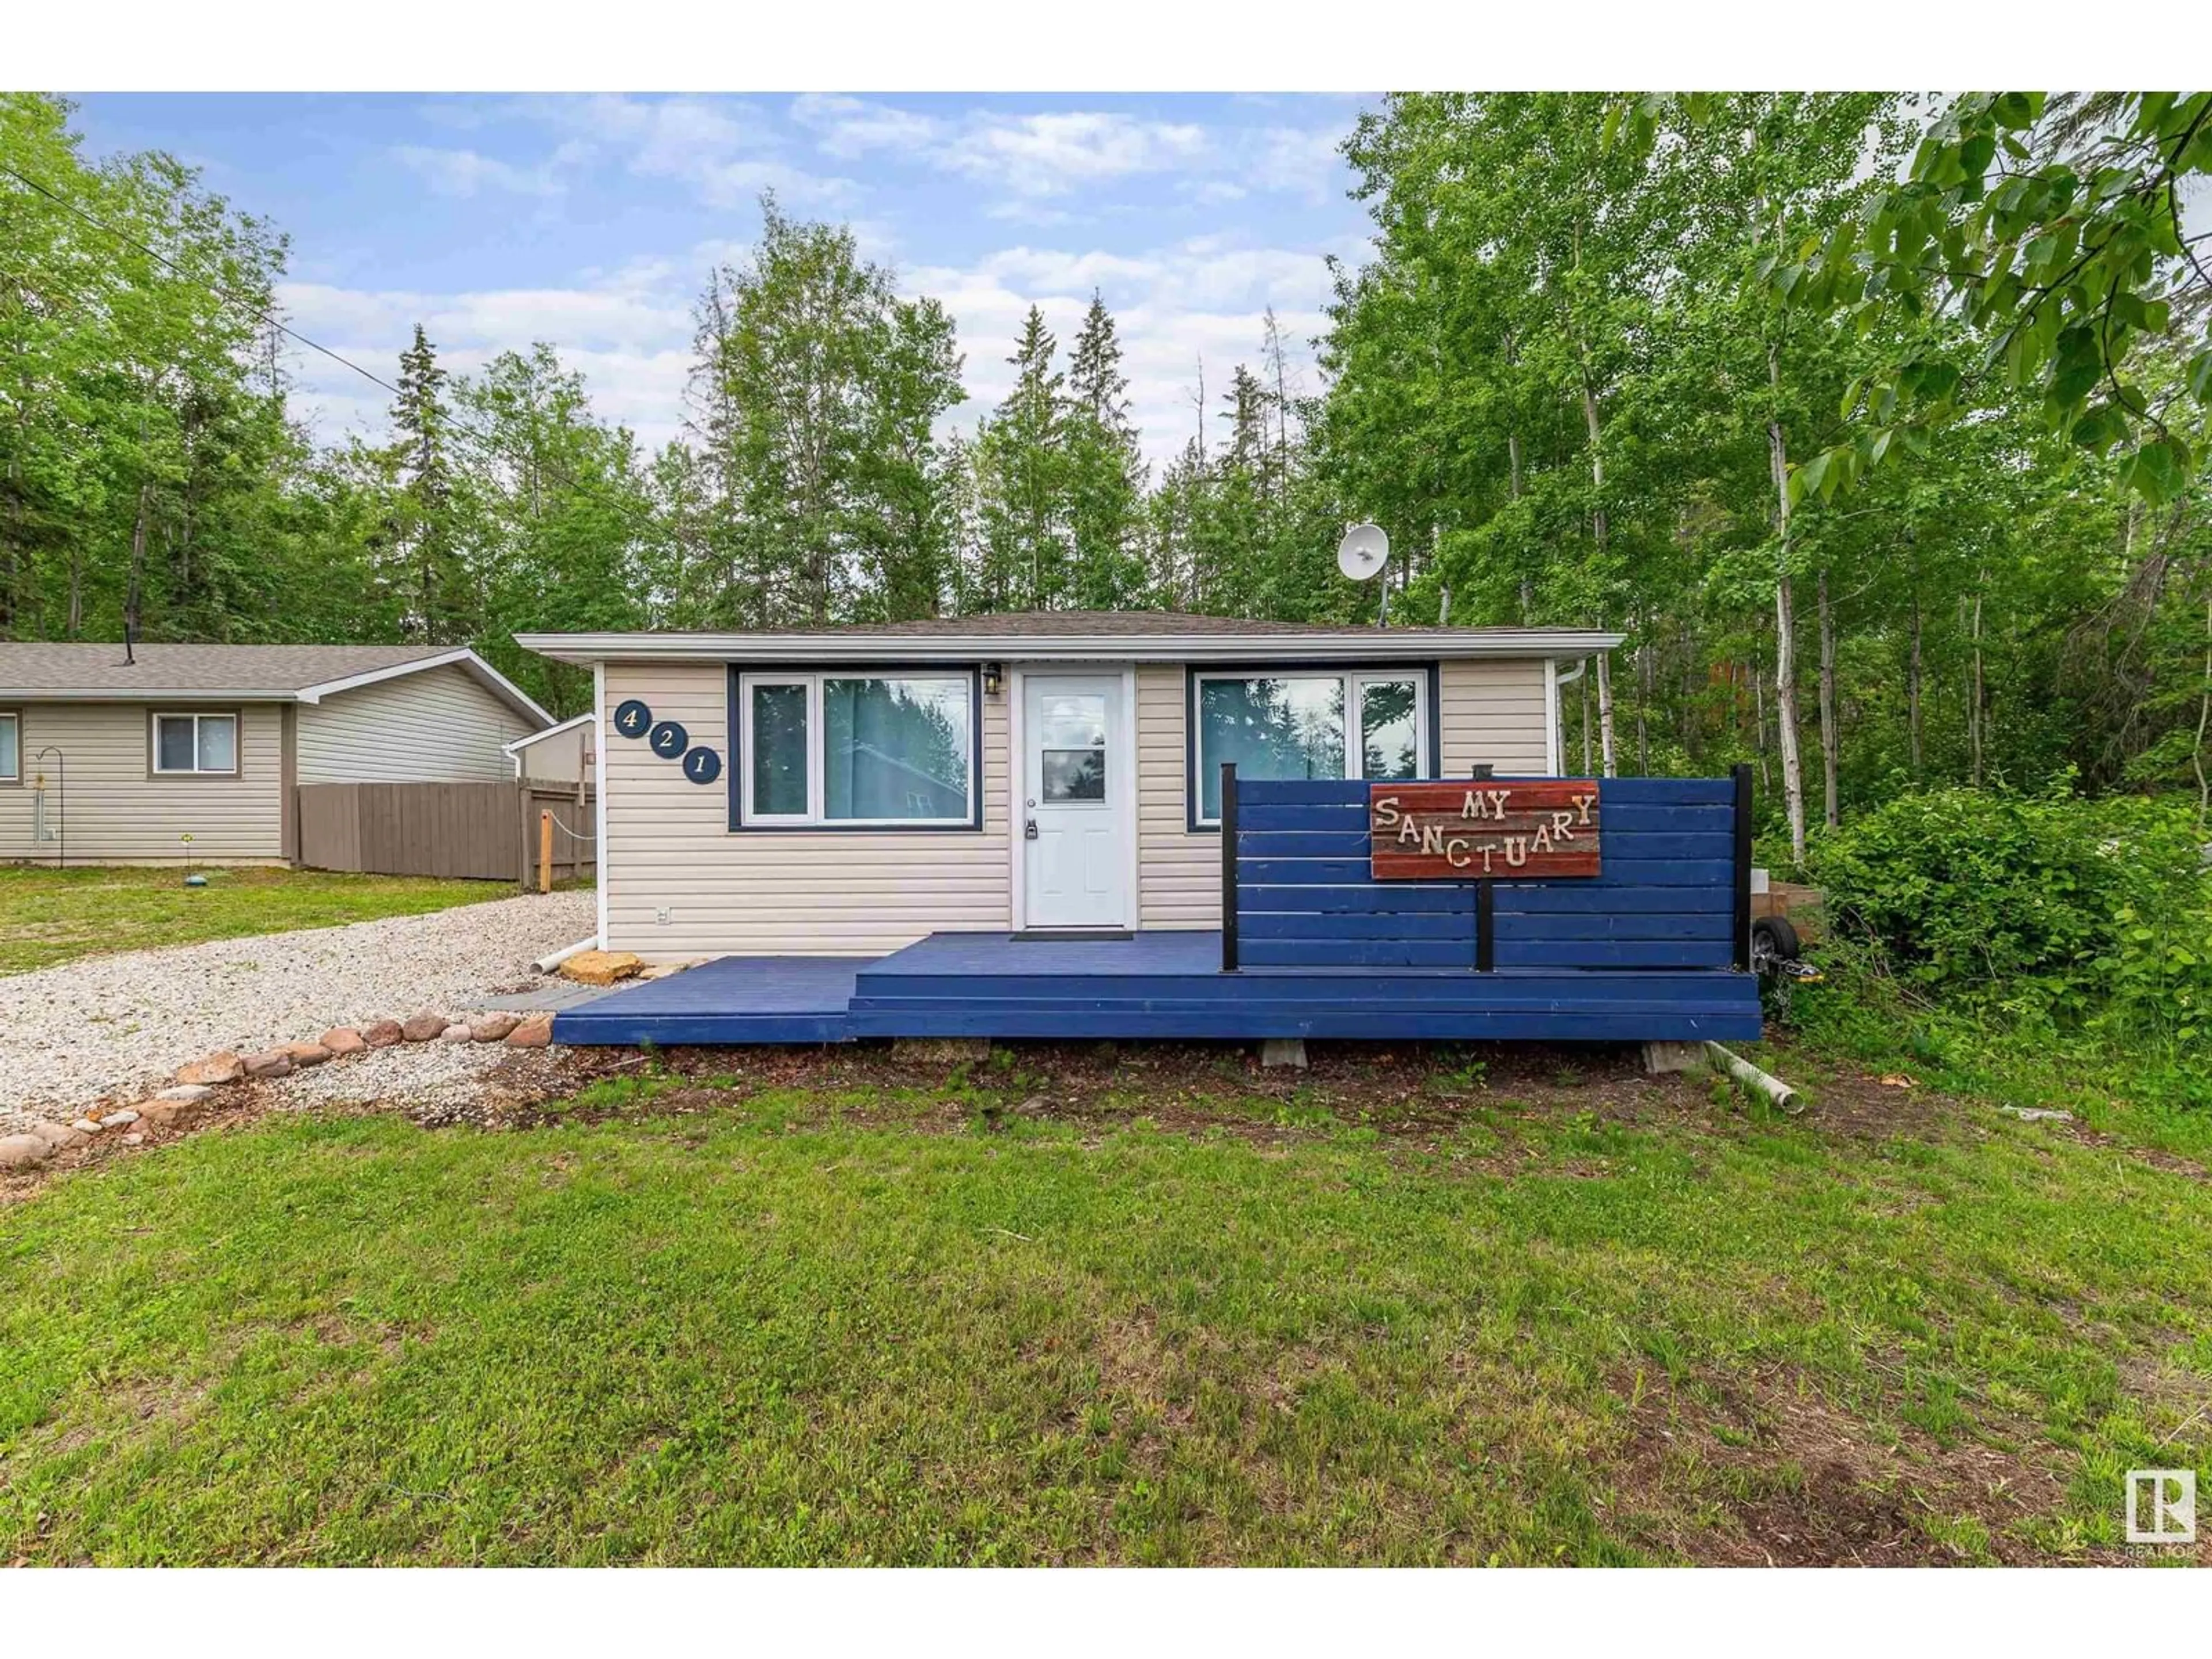 Cottage for 421 Lakeview DR, Rural Lac Ste. Anne County Alberta T0E1V0